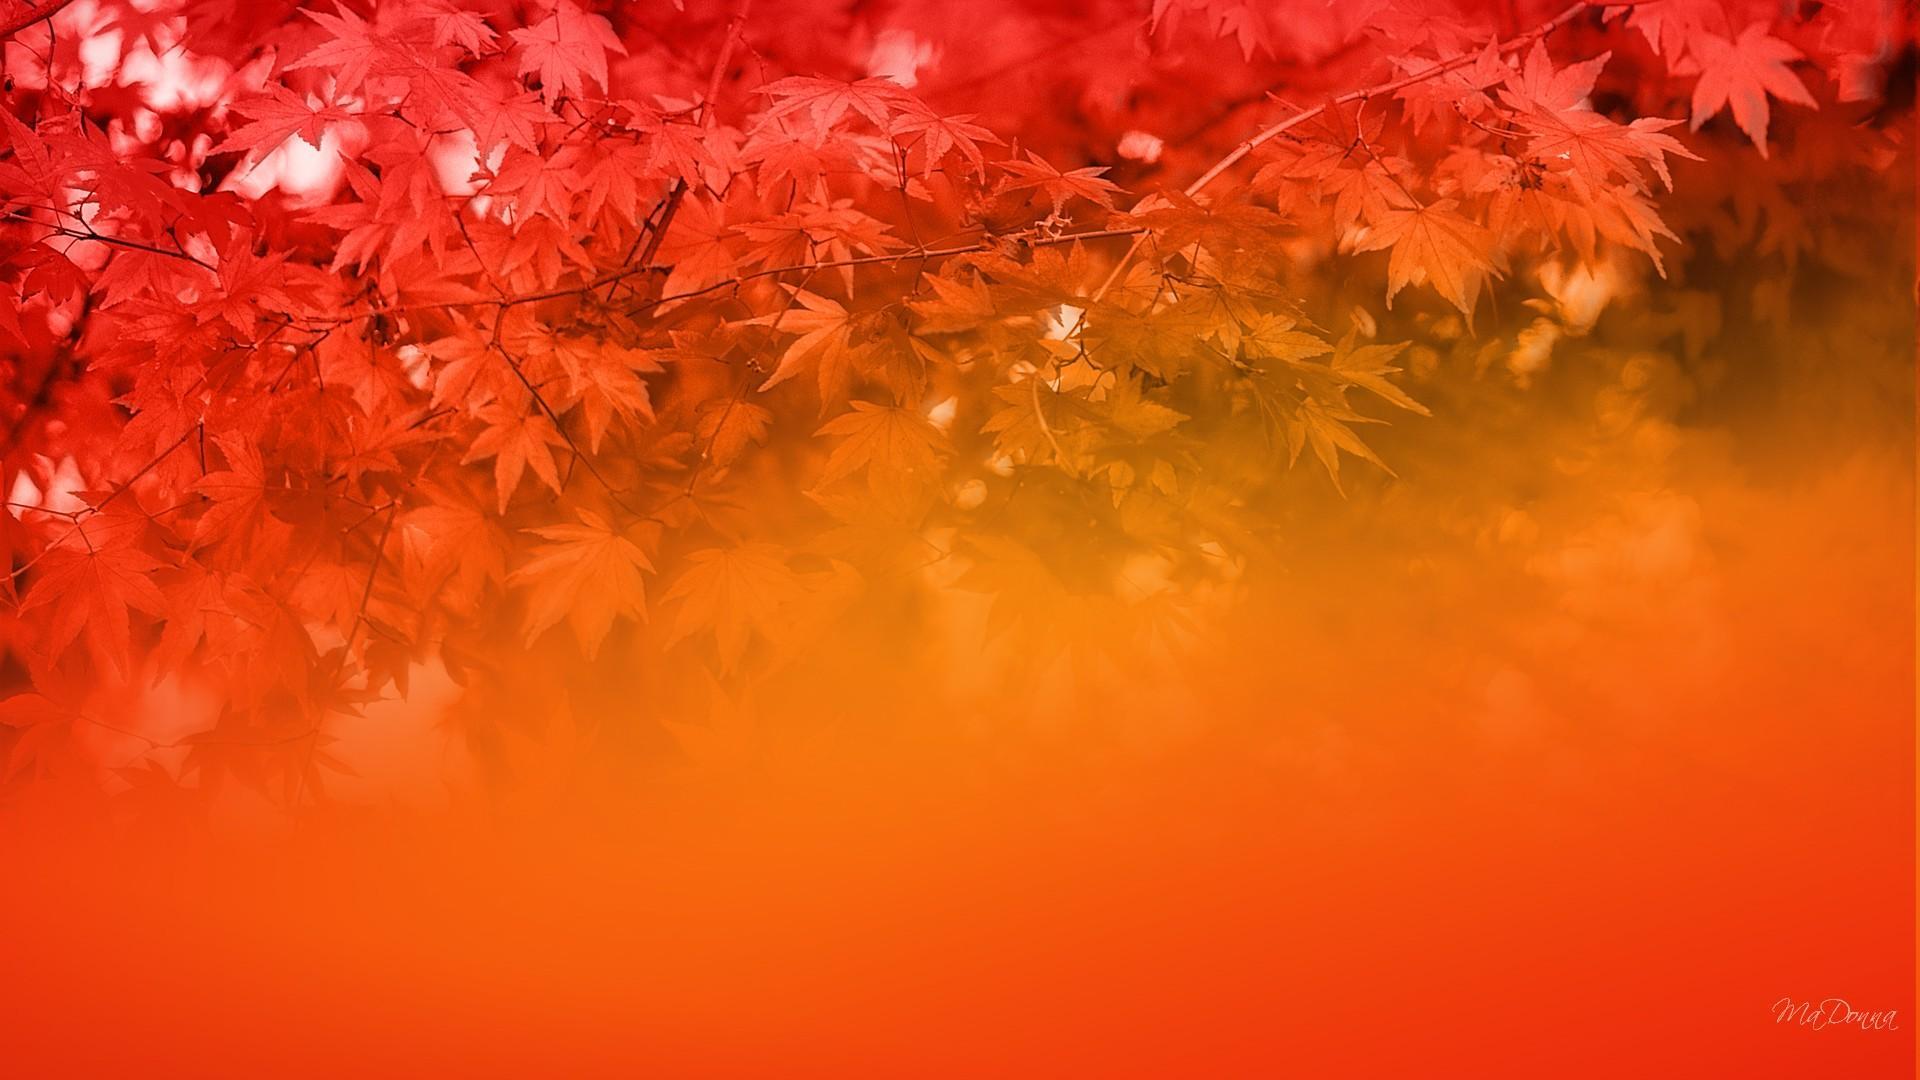 Autumn Colors Wallpaper (image in Collection)